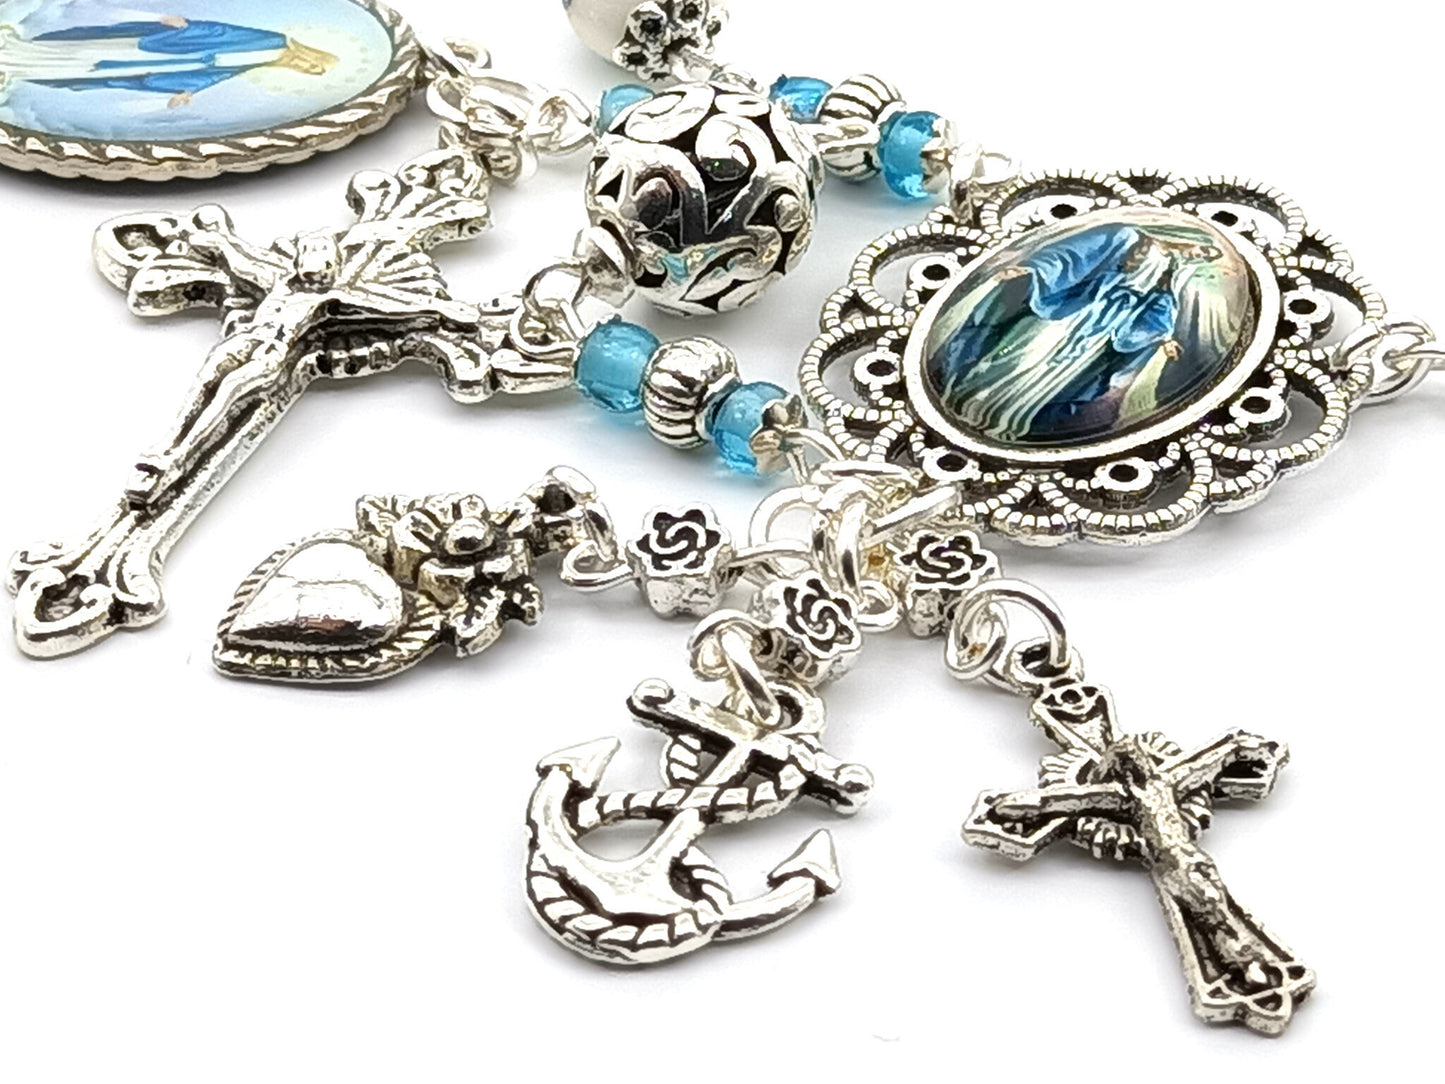 Our Lady of Grace unique rosary beads single decade with porcelain and silver beads, silver crucifix, small medals and picture centre medal.